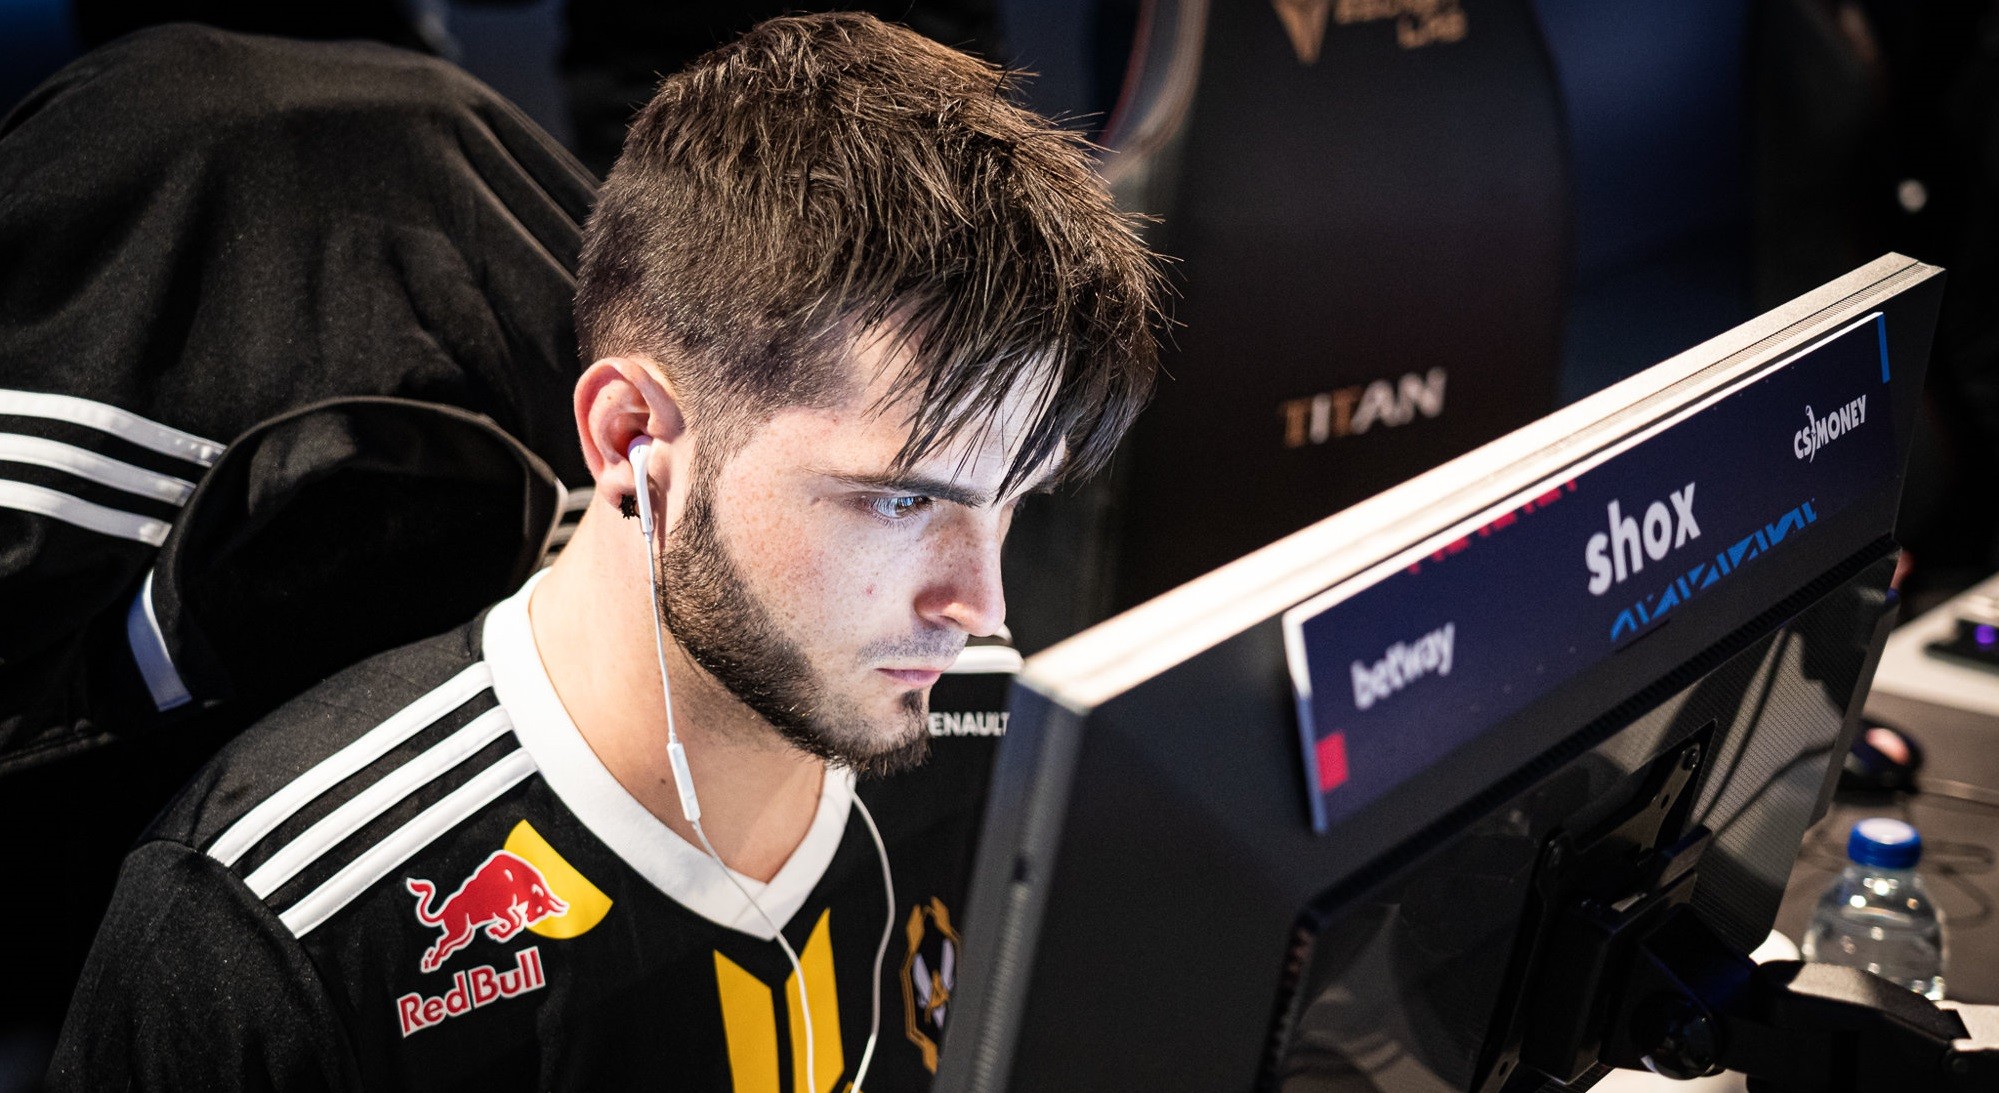 Shox will not play for Vitality in 2022